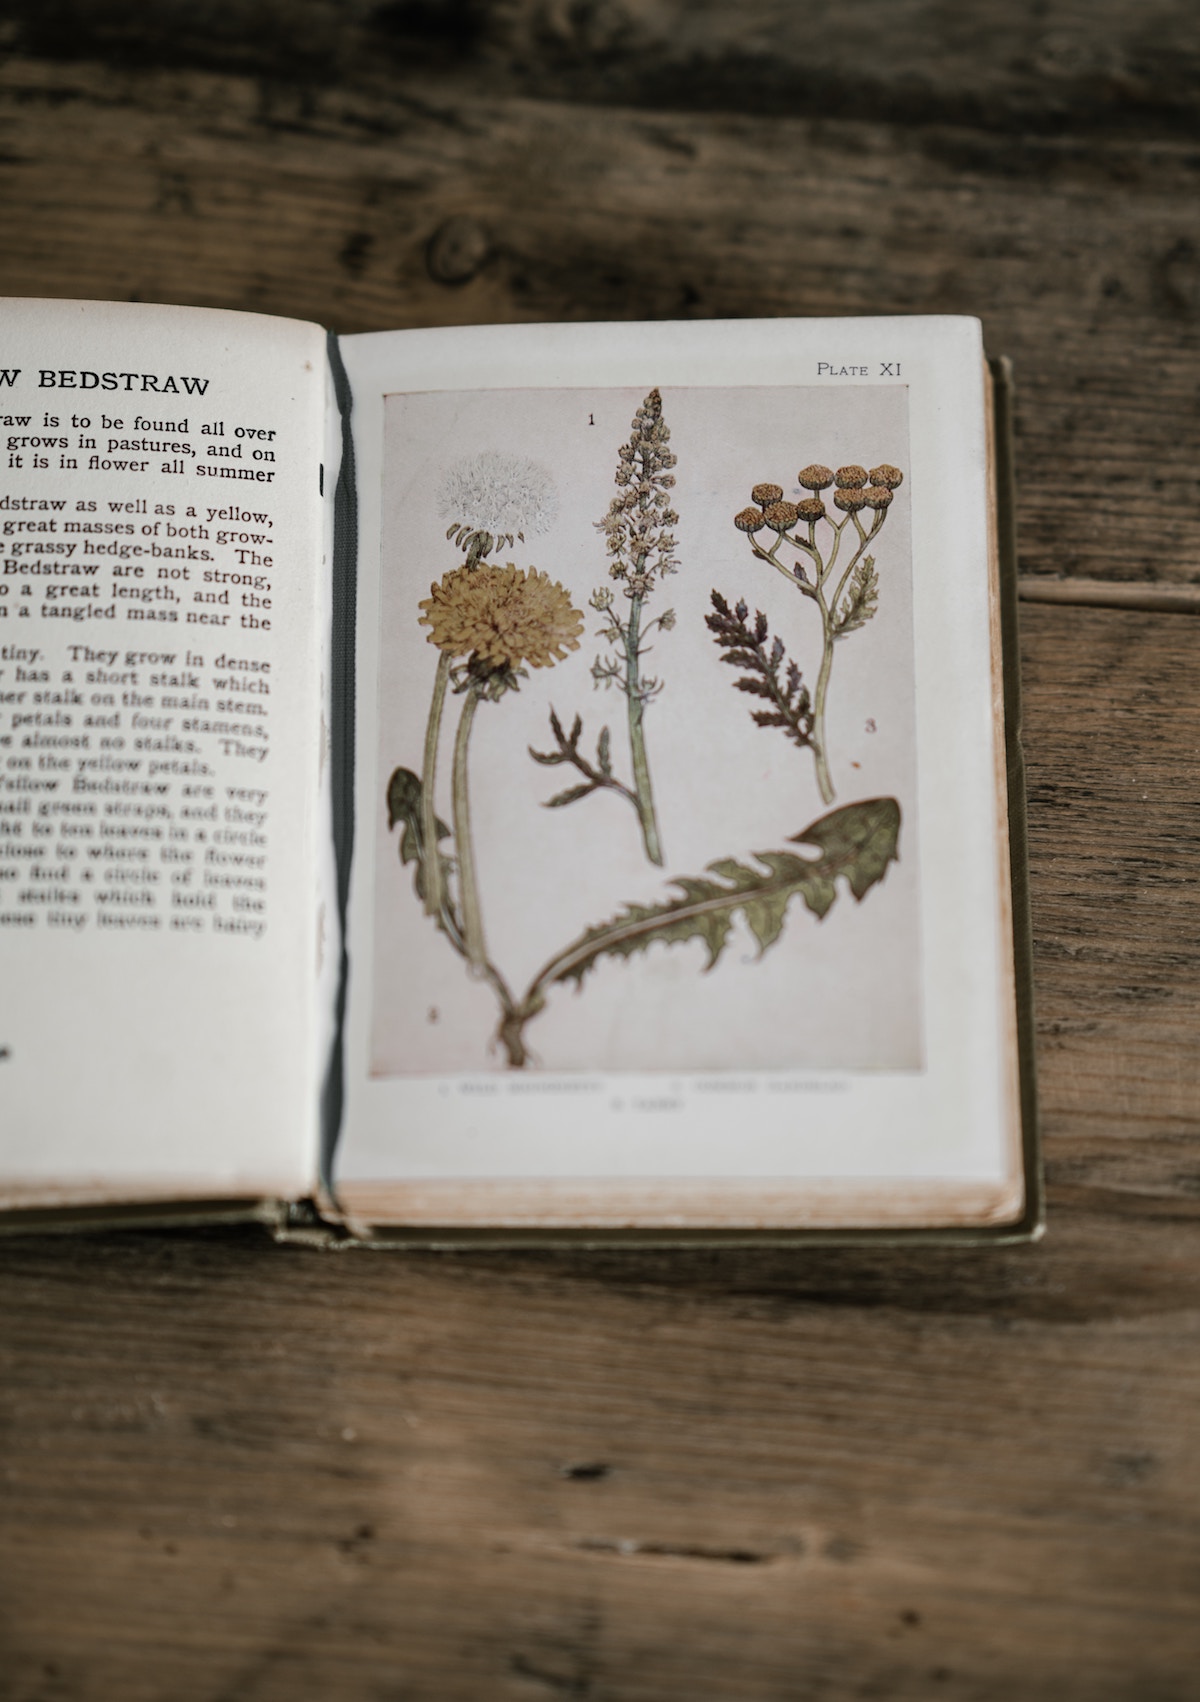 6 of the Best Books For Your Advanced Herbal Studies | Herbal Academy | As an herbalist, it's important to continue to build your herbal library. Here are 6 of the best books for your advanced herbal studies to get started.